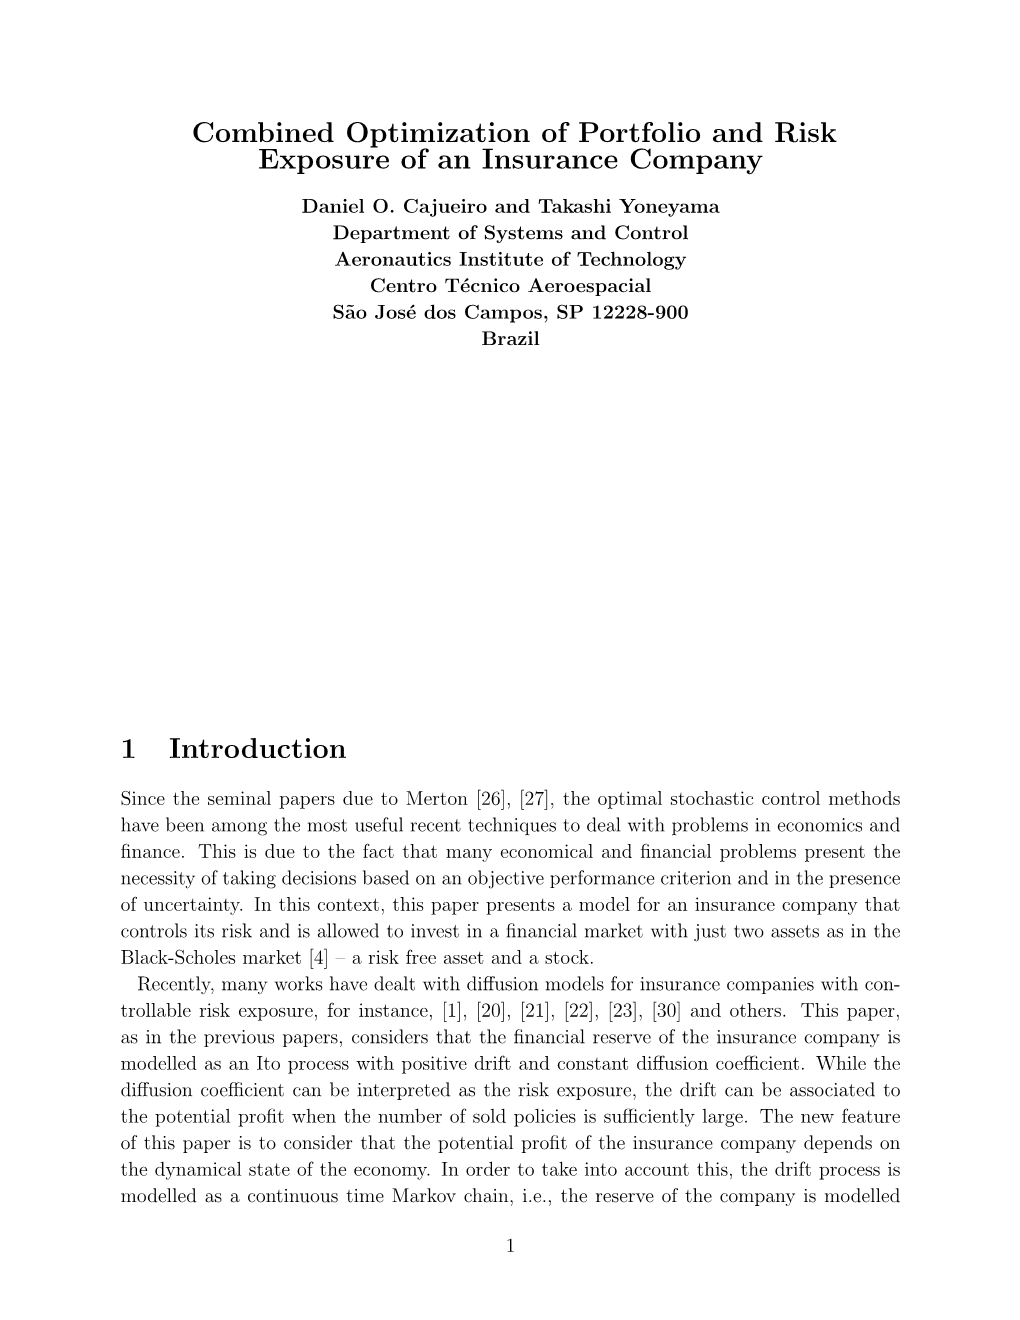 Combined Optimization of Portfolio and Risk Exposure of an Insurance Company